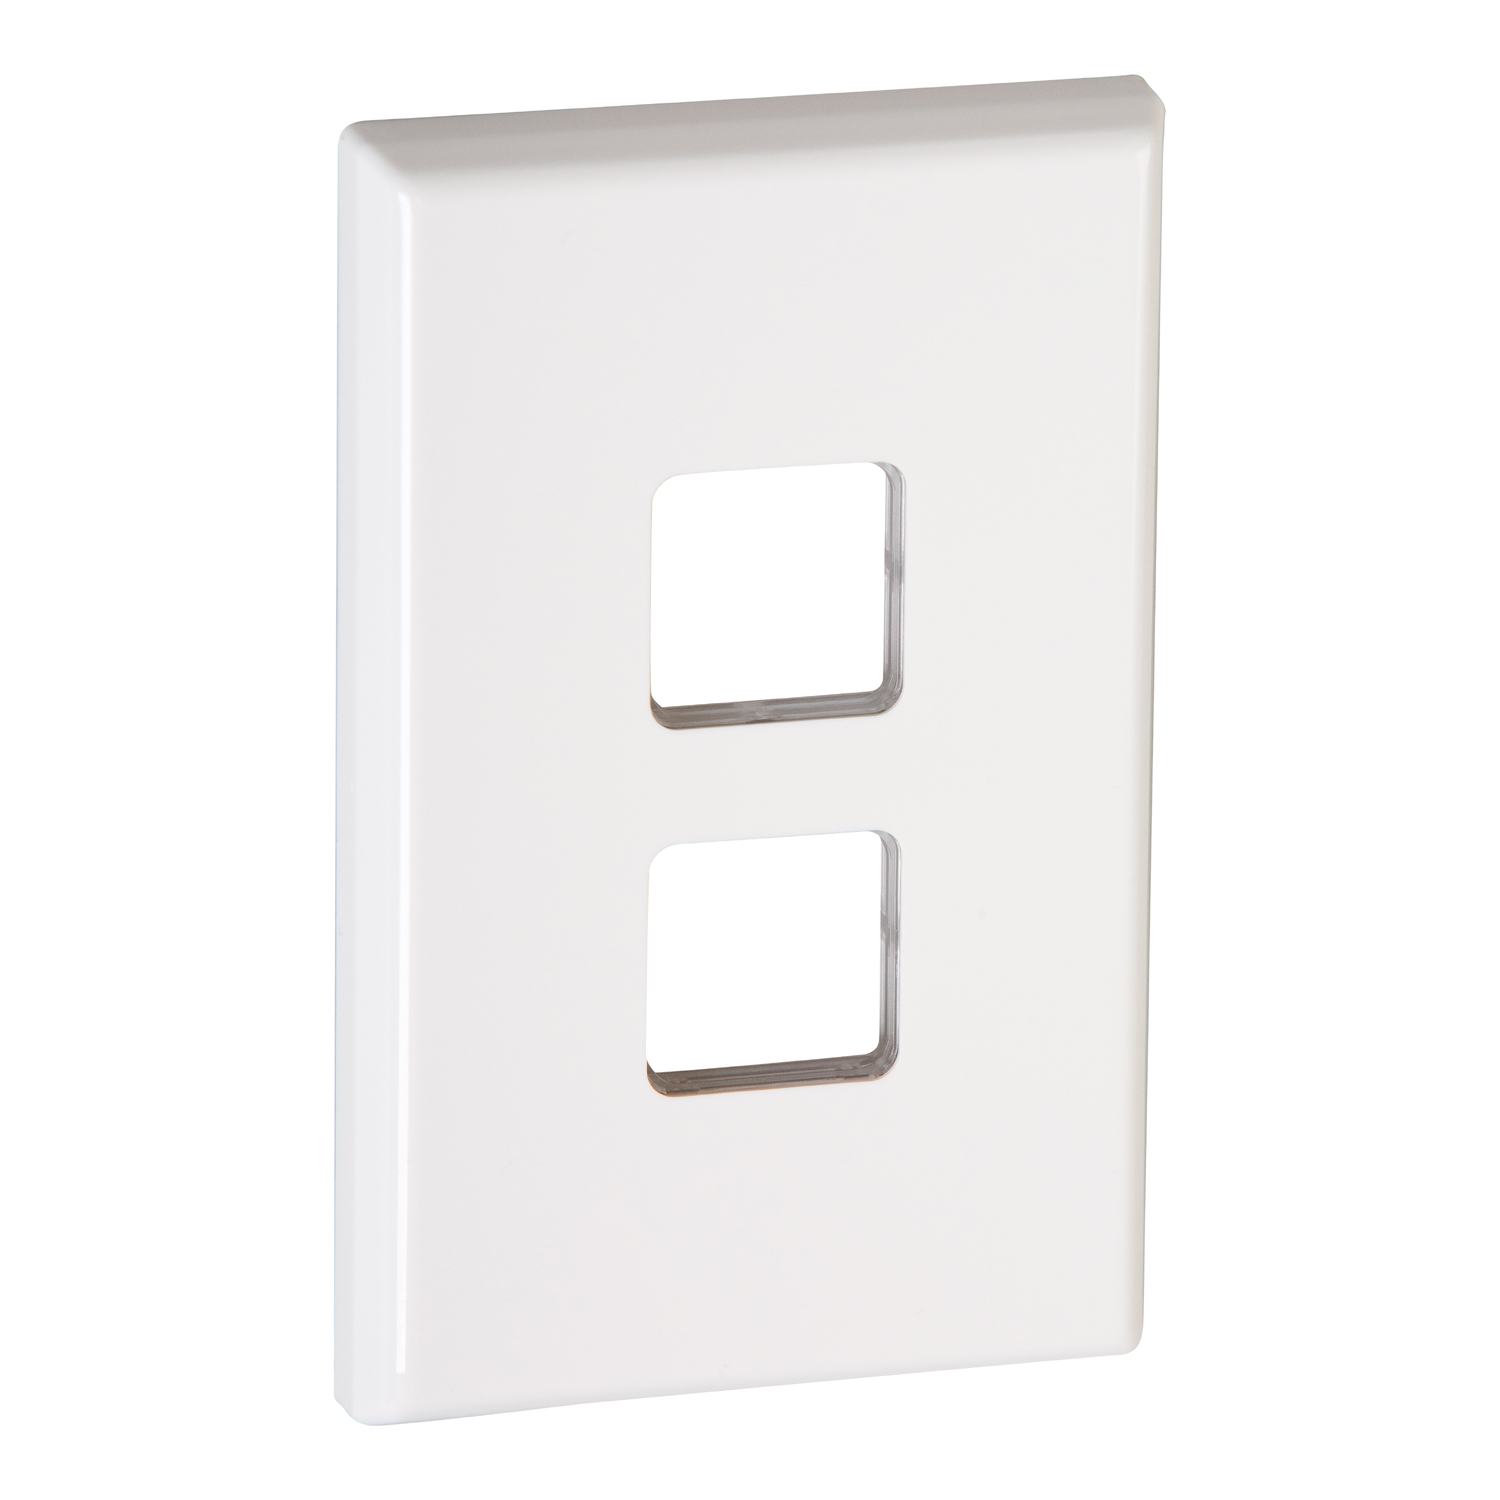 PDL 600 Series - Grid + Cover Plate Switch 2-Gang - White